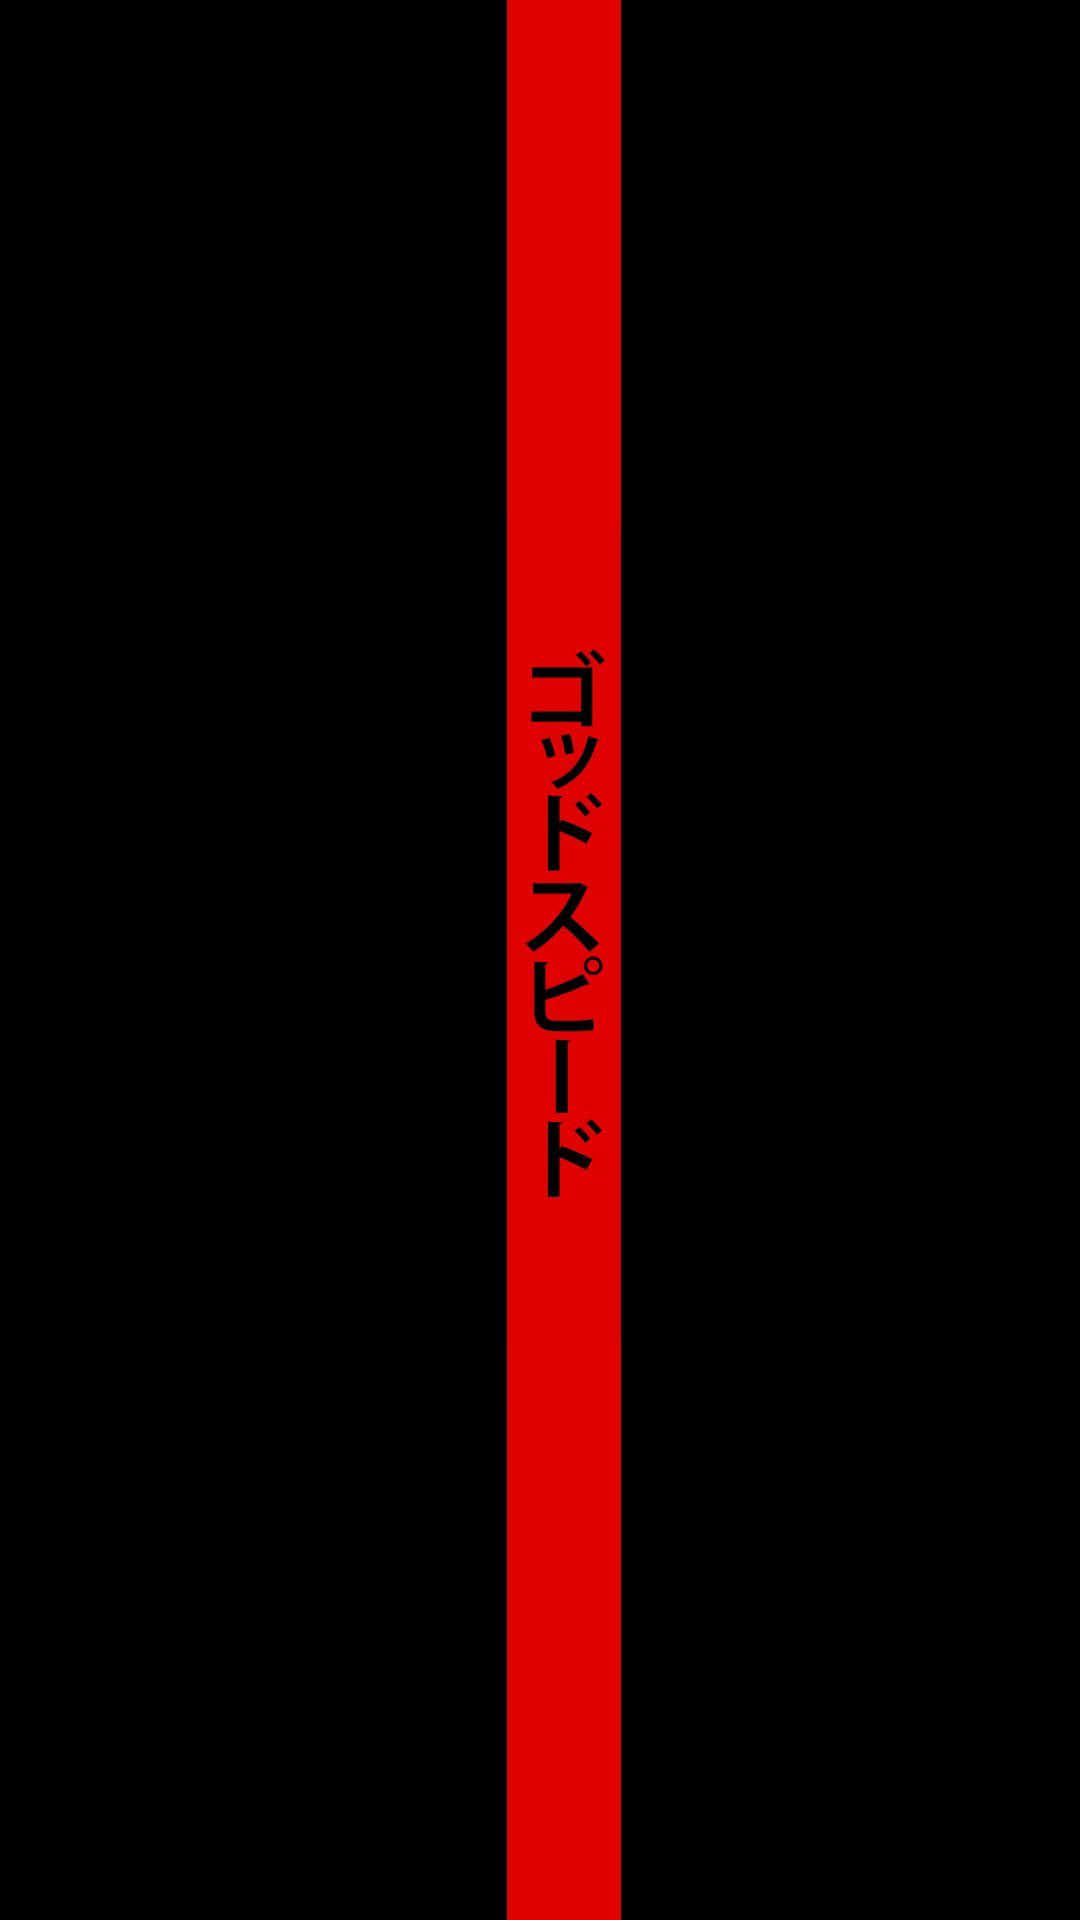 A Red Line With The Word Wallpaper